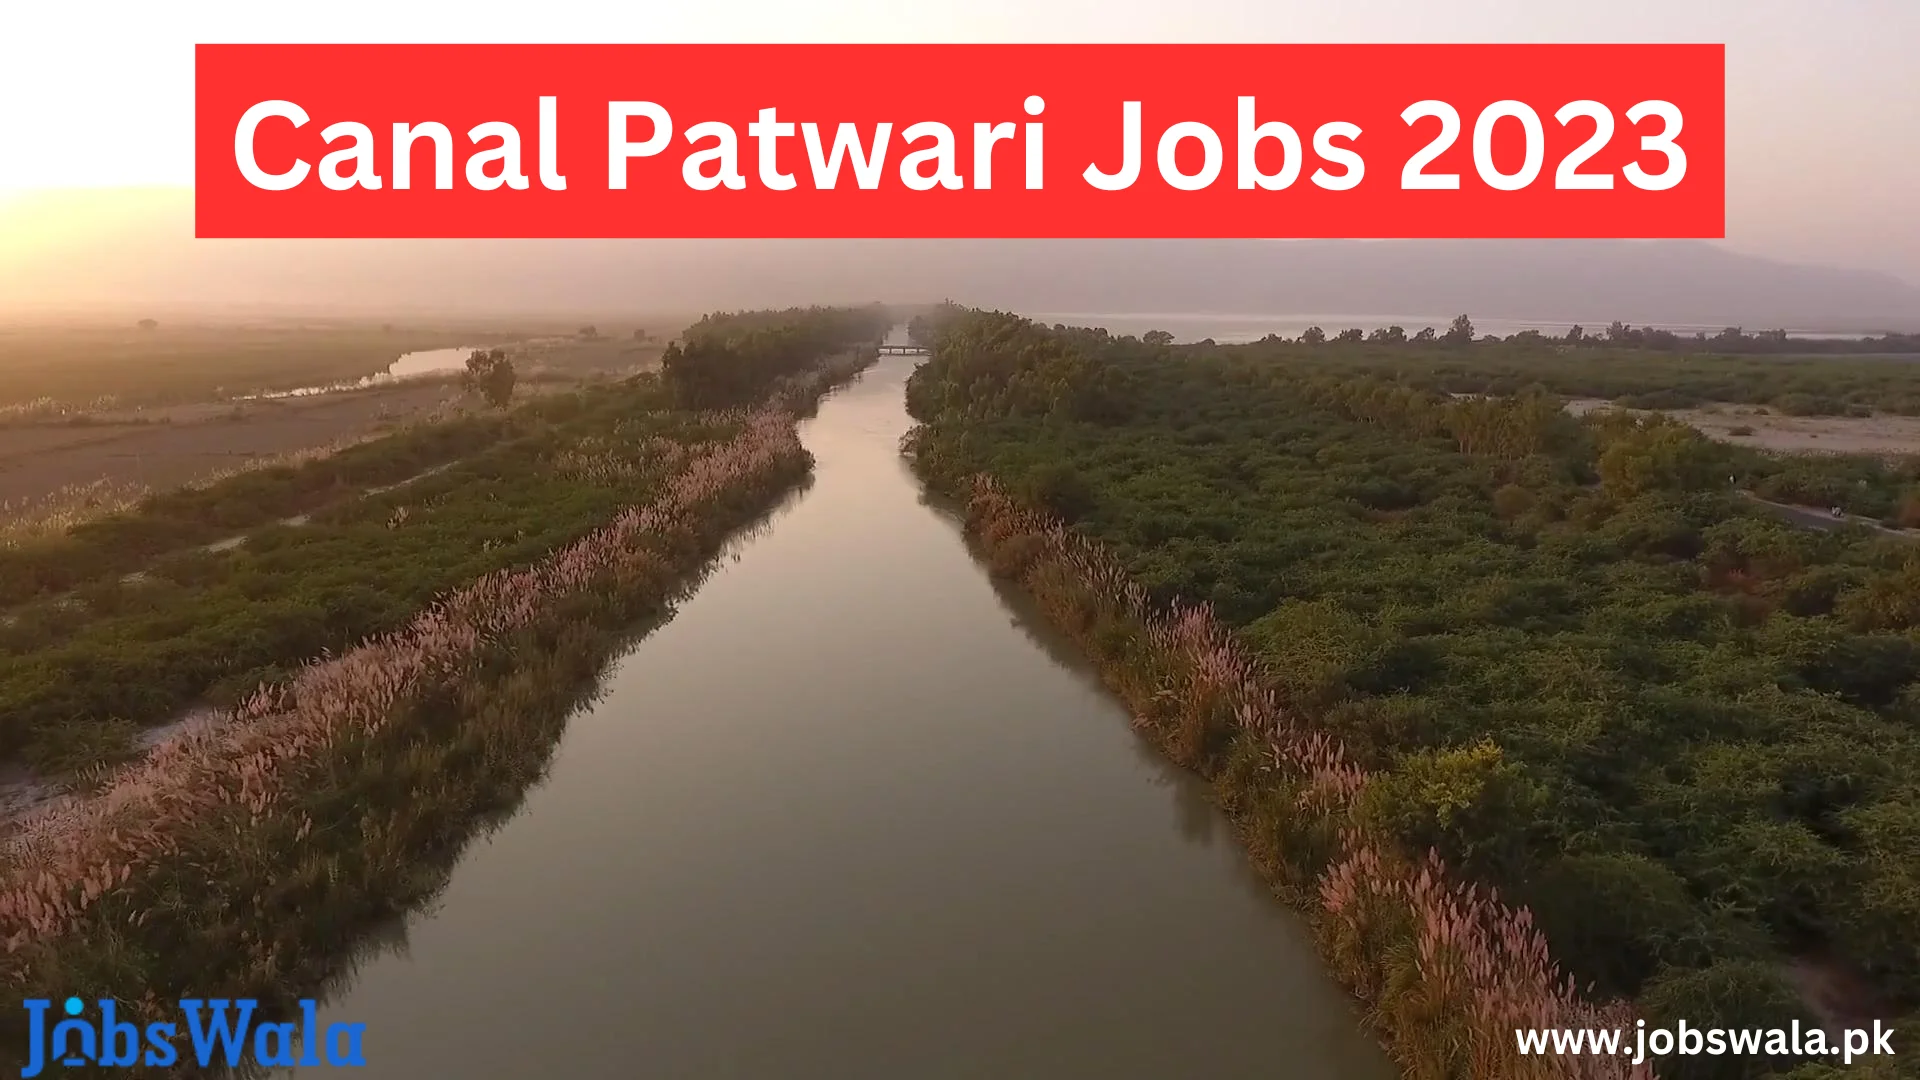 Last Date to Apply for Canal Patwari Jobs 2023